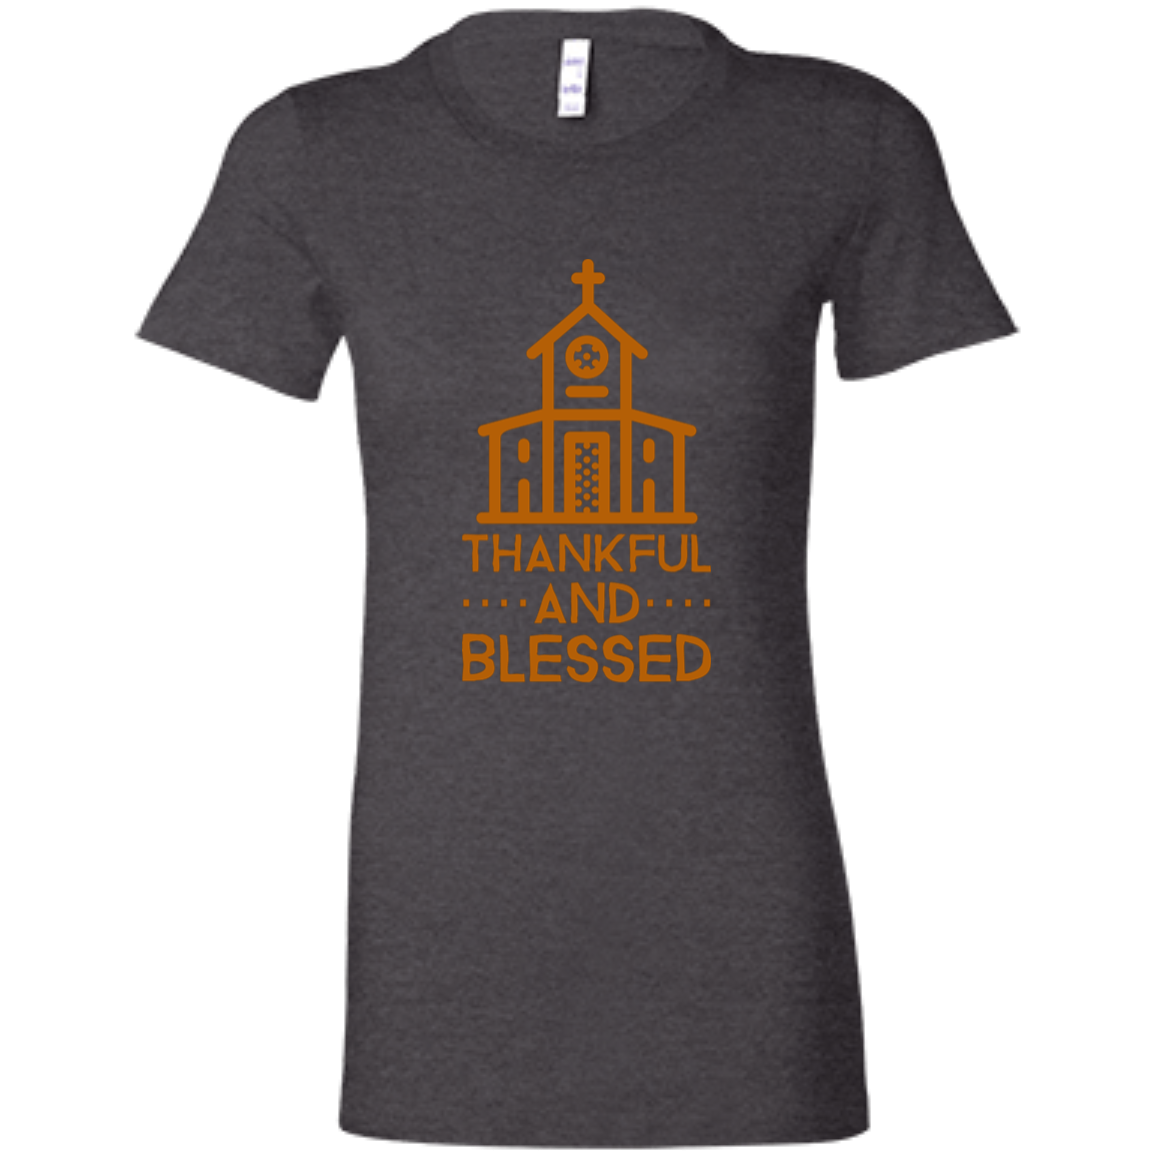 6004 Bella + Canvas Ladies Favorite T-Shirt Thankful and Blessed 10 Colors 5 Sizes T-Shirts (3010787639396)